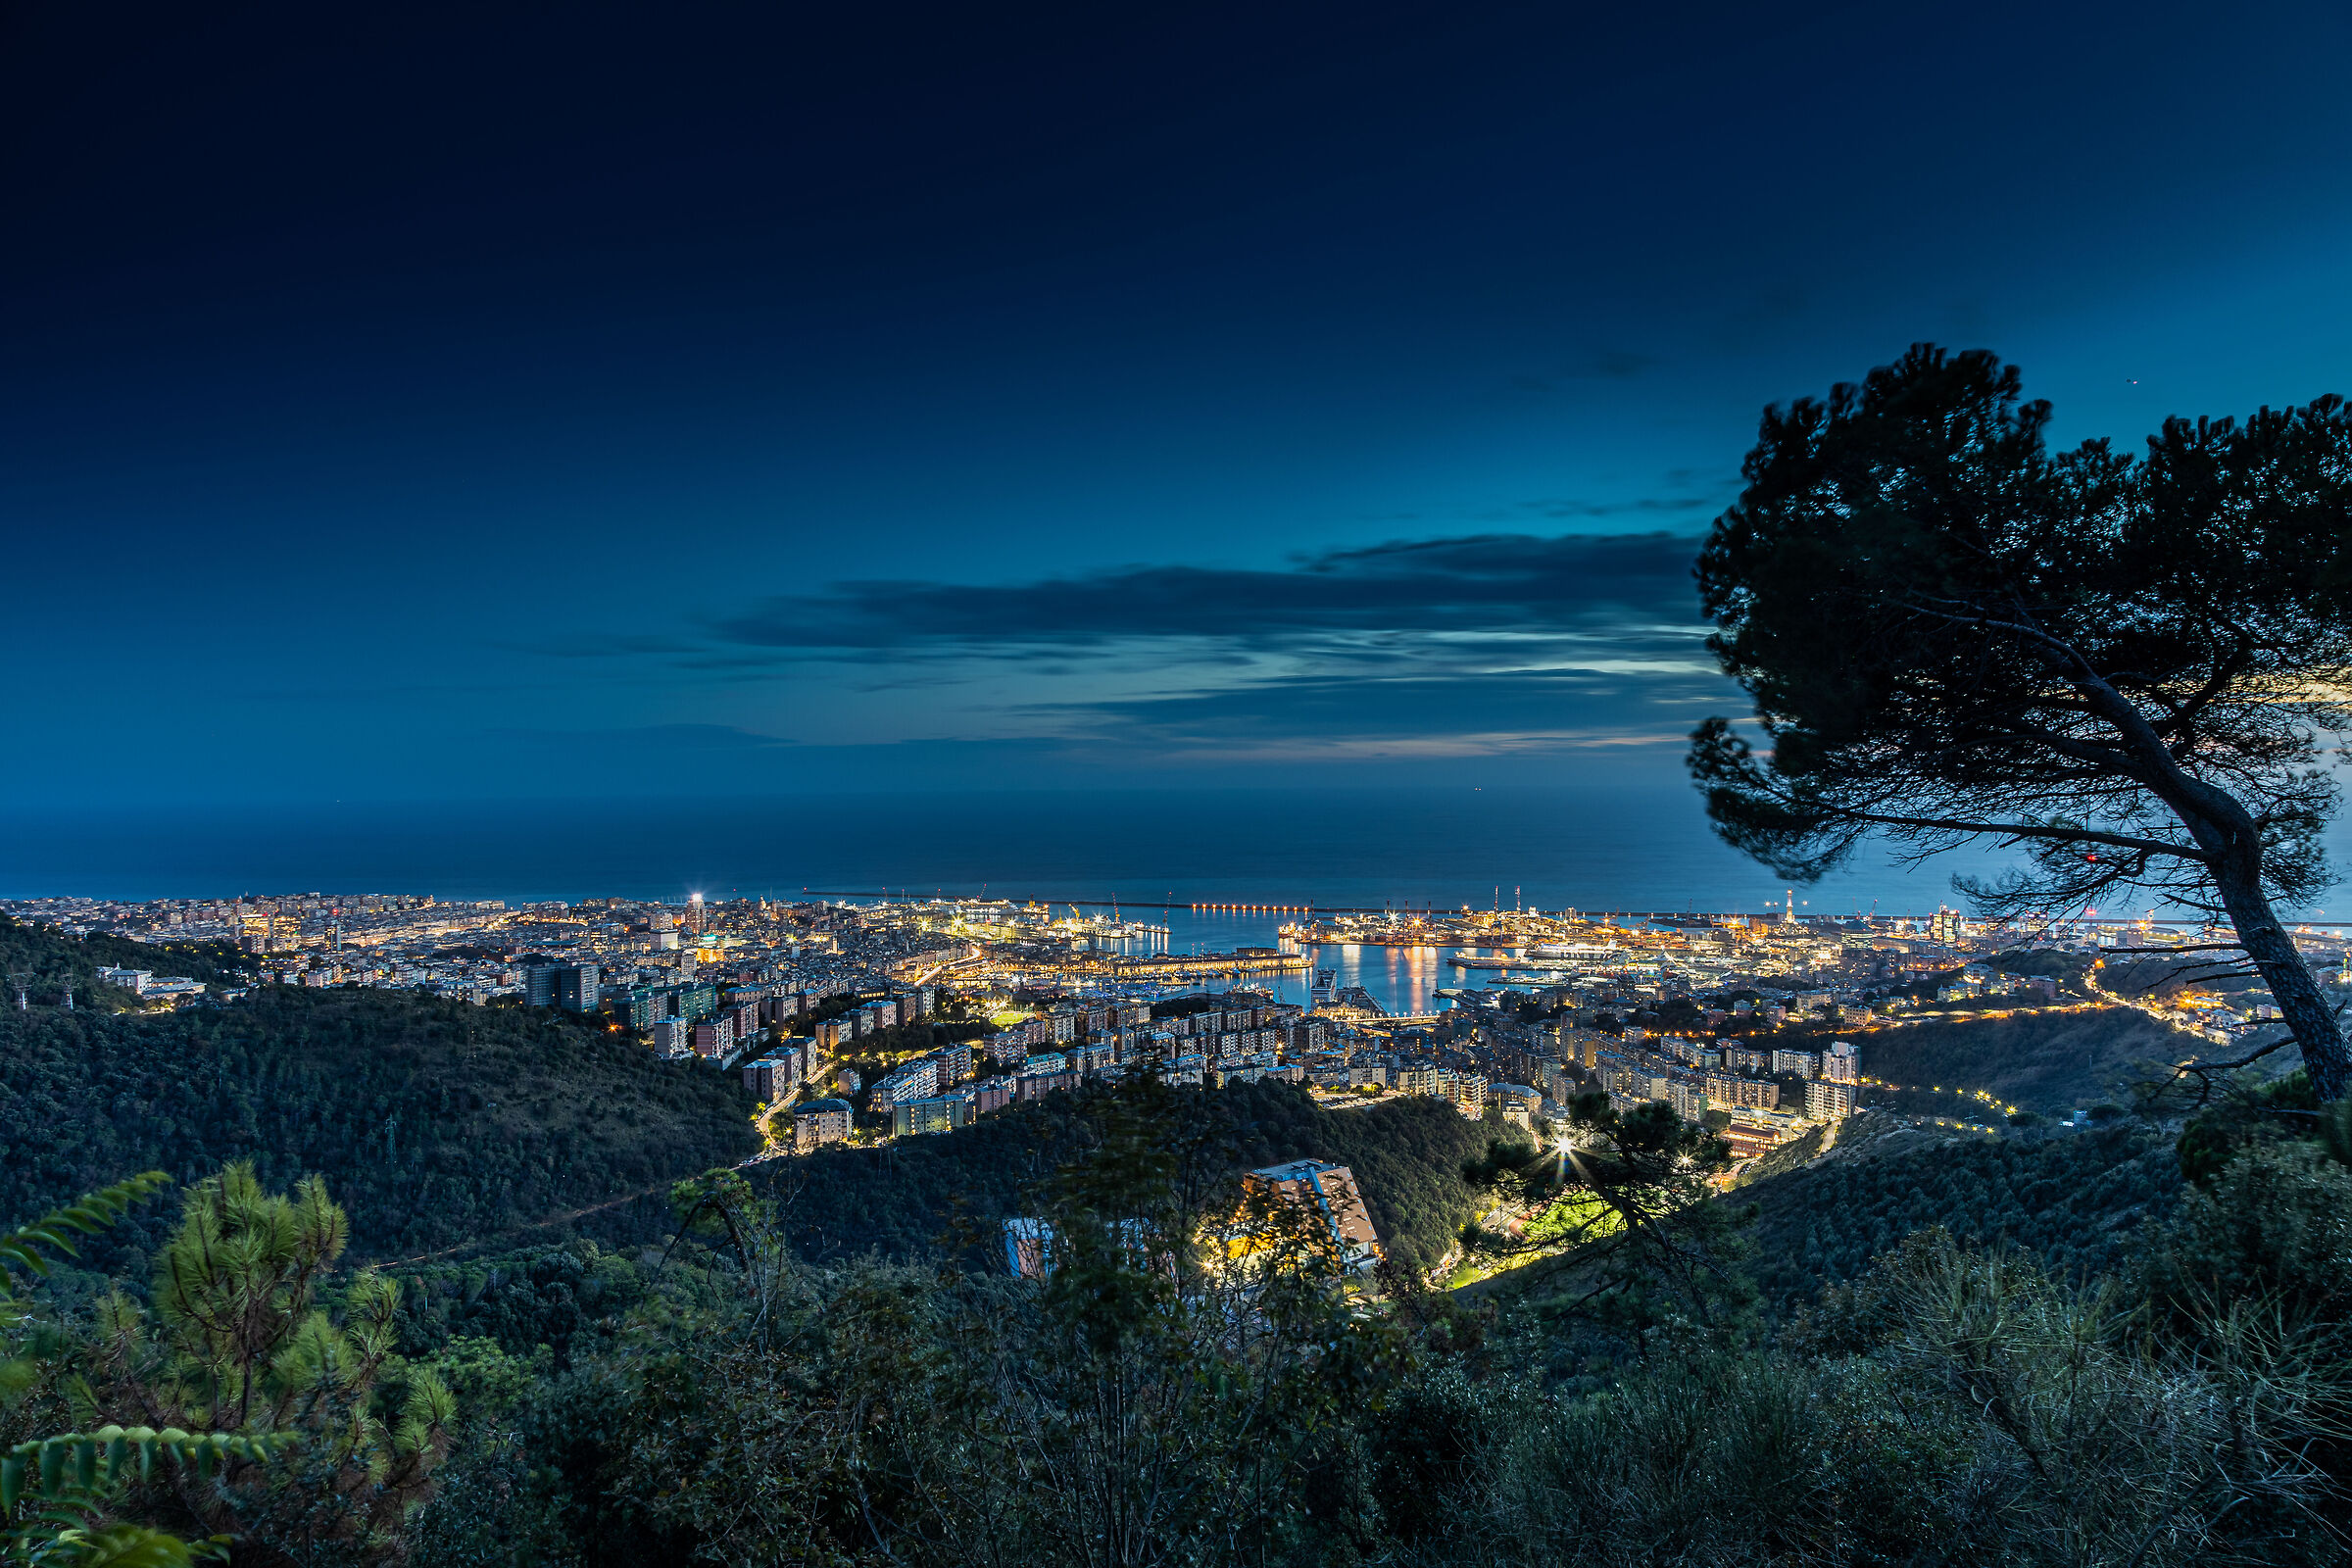 Blue hour from the Parco delle Mura - Genoa...